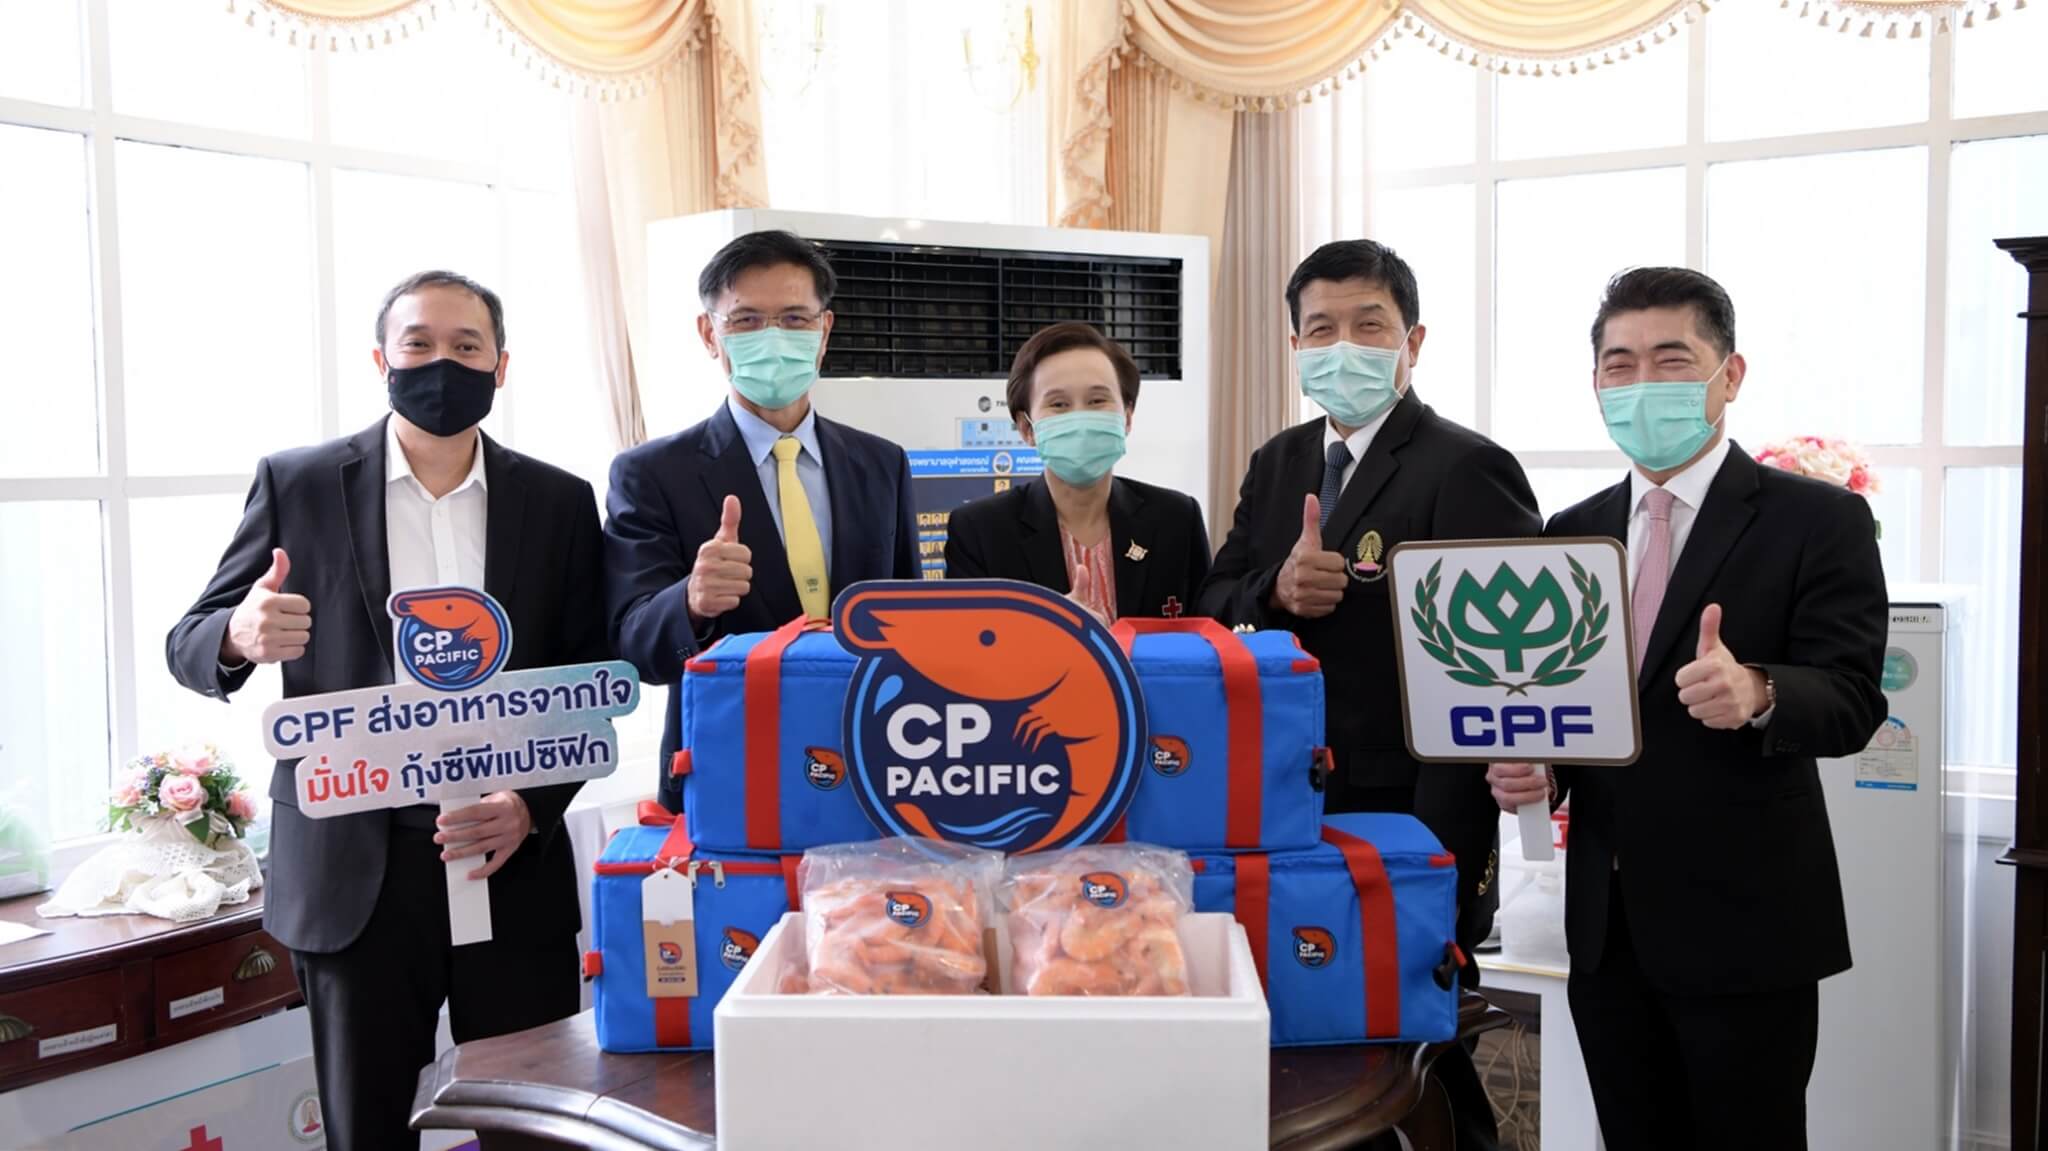 CP Foods donates "CP Pacific Shrimp" to support frontline workers